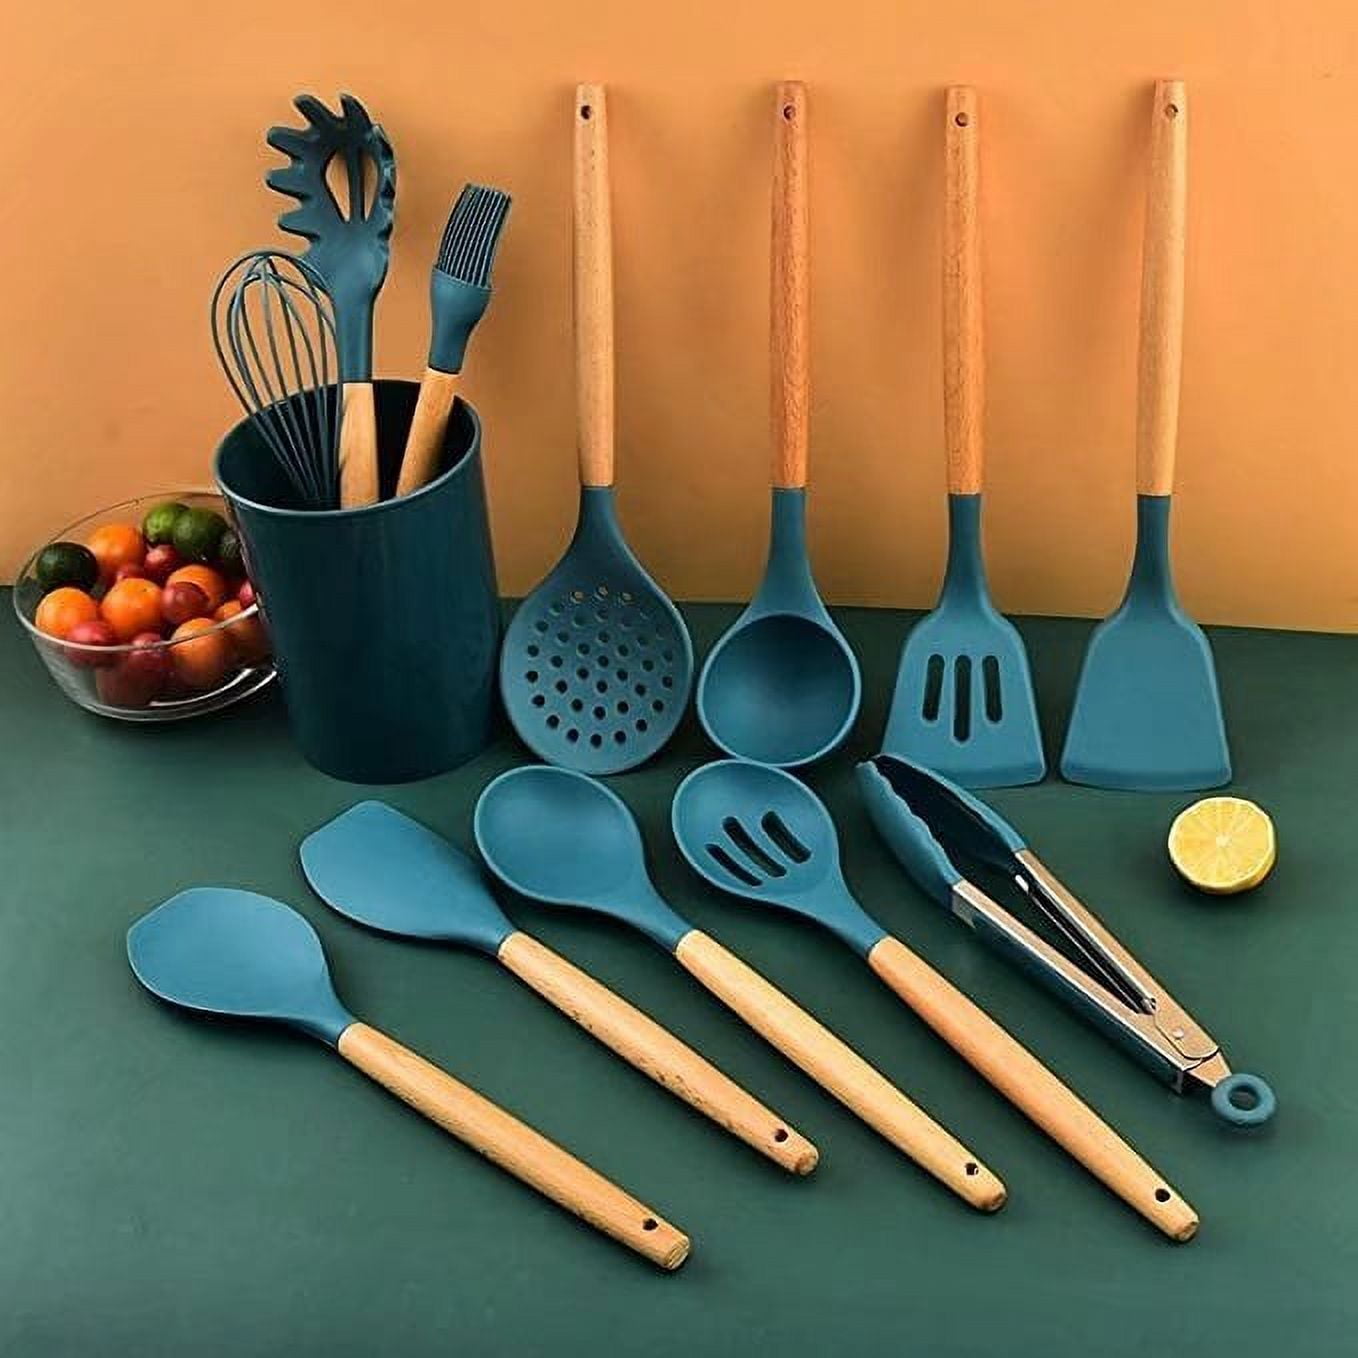 12 Pcs Silicone Kitchen Utensils Set with Holder Wooden Handles Heat  Resistant & BPA Free & Non-Toxic(blue) 